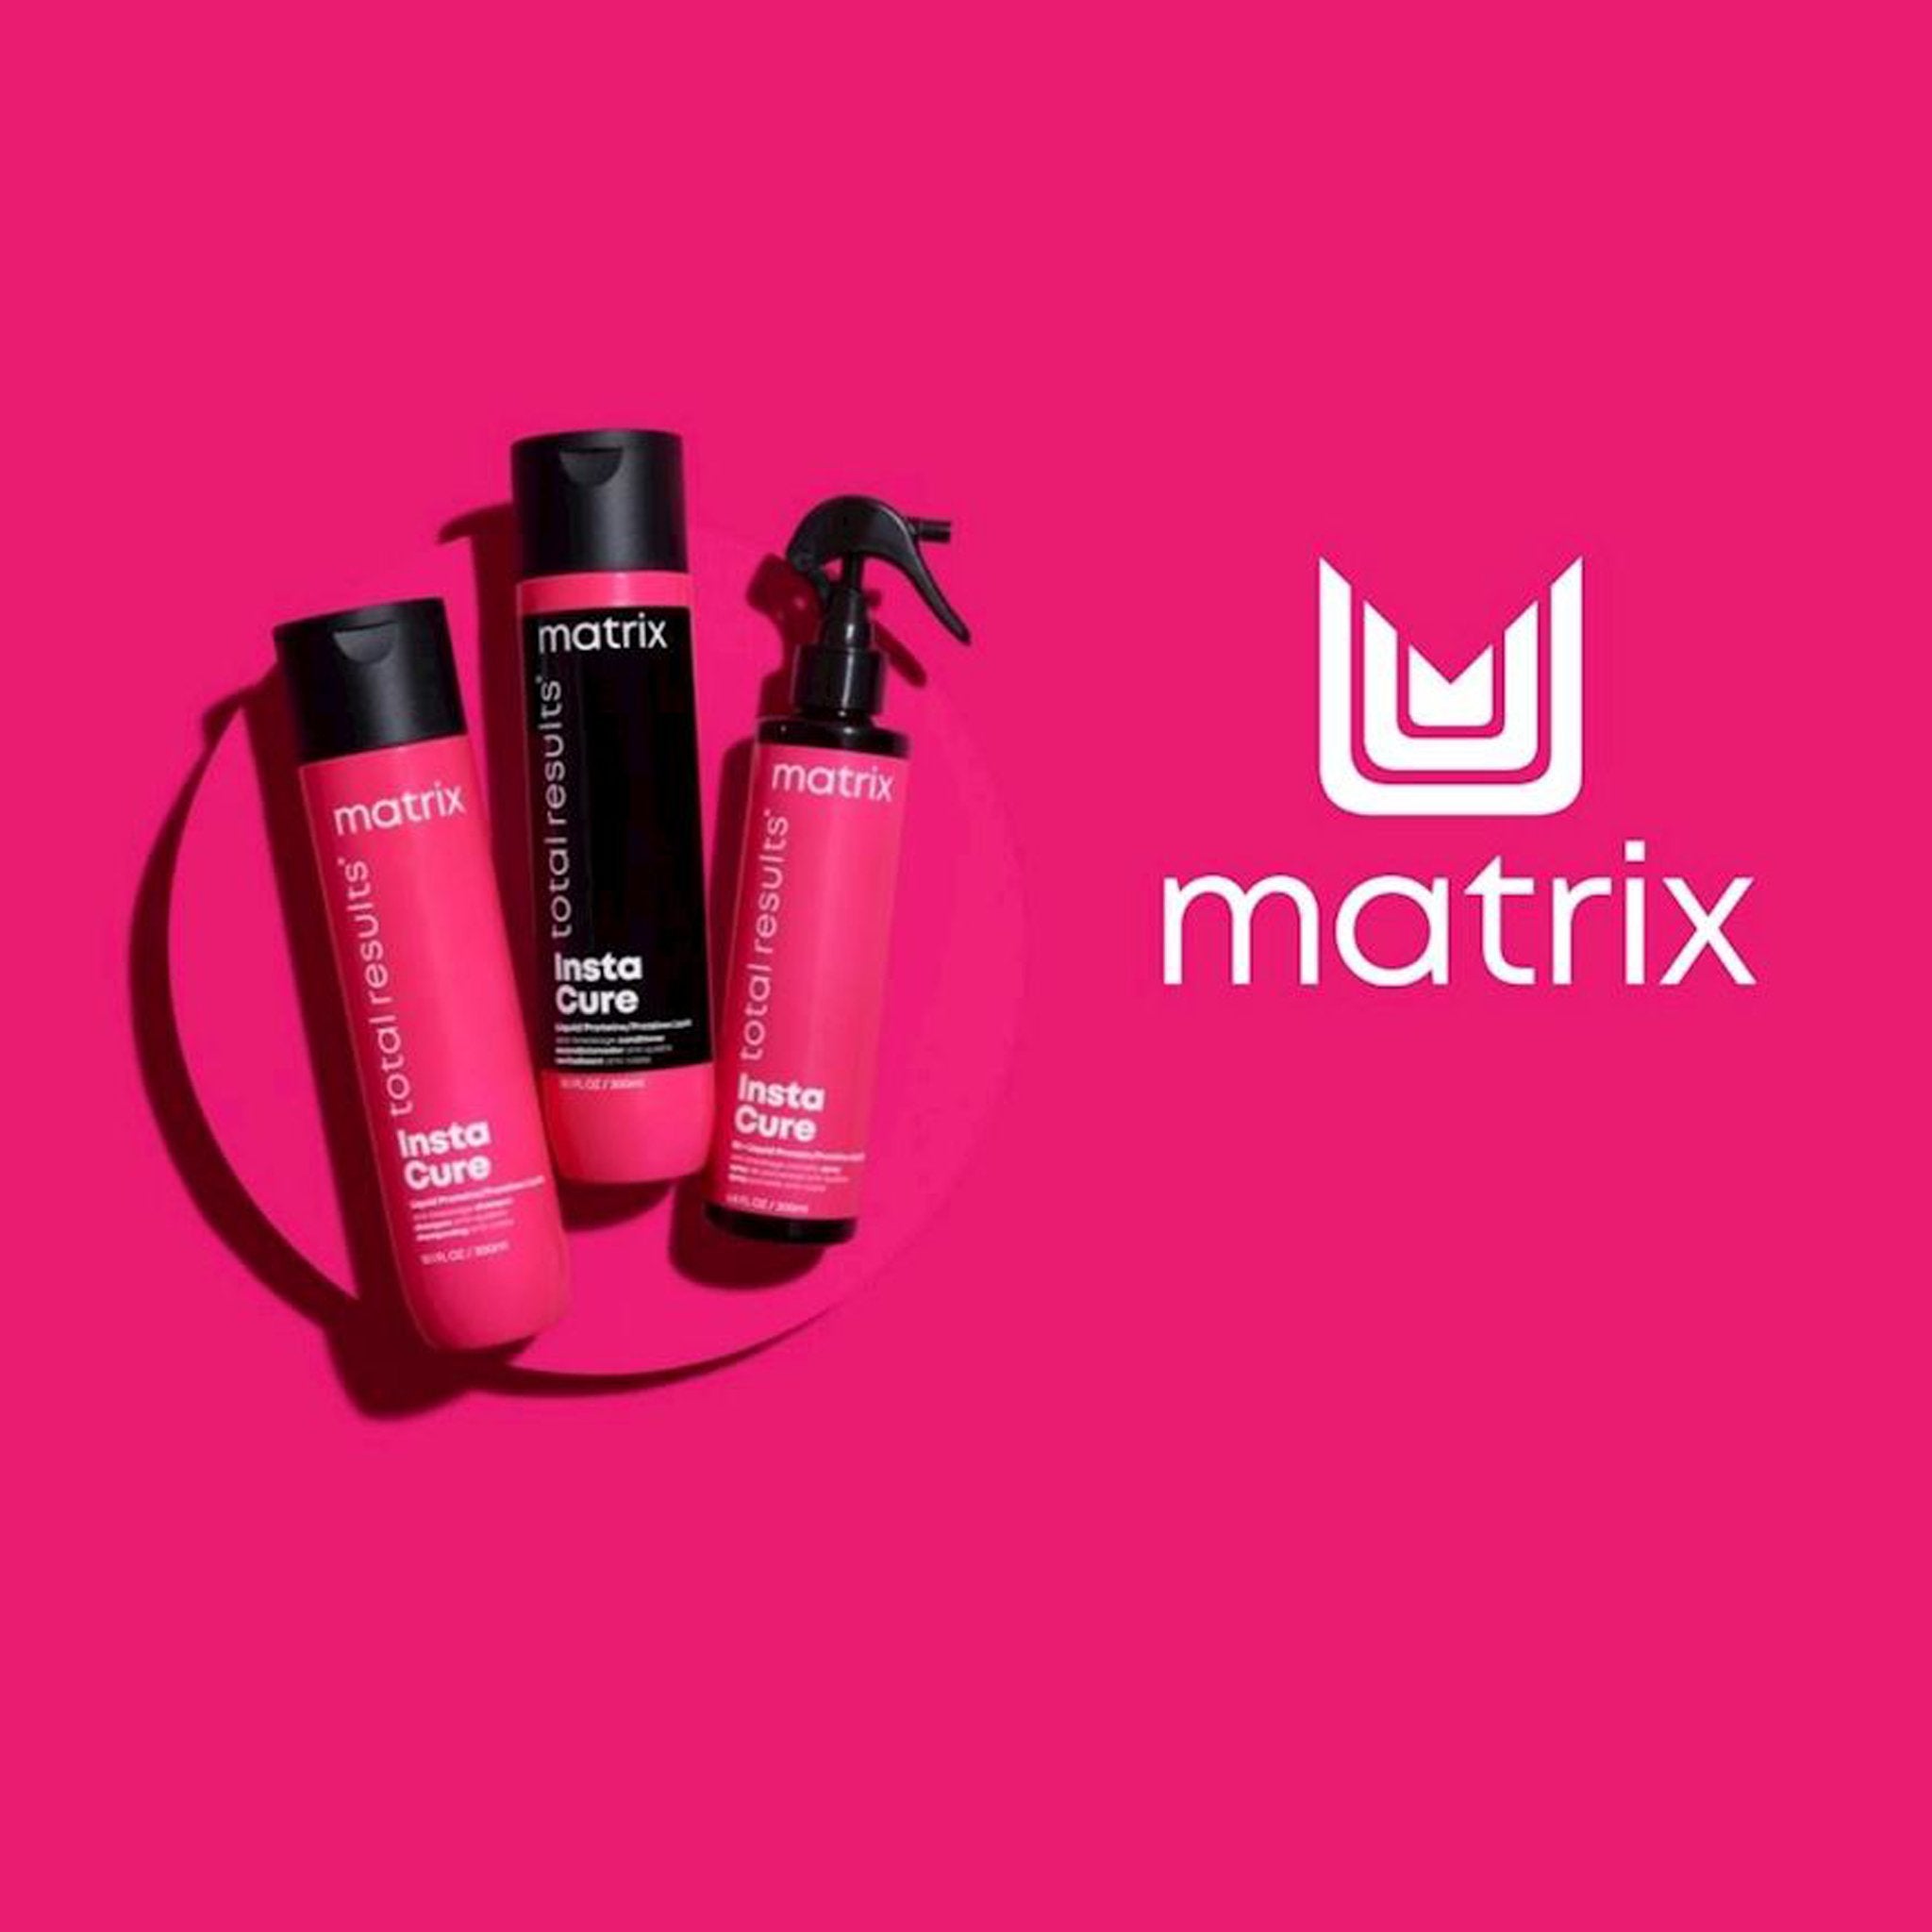 Matrix. Total Results Shampoing Instacure - 300 ml - Concept C. Shop